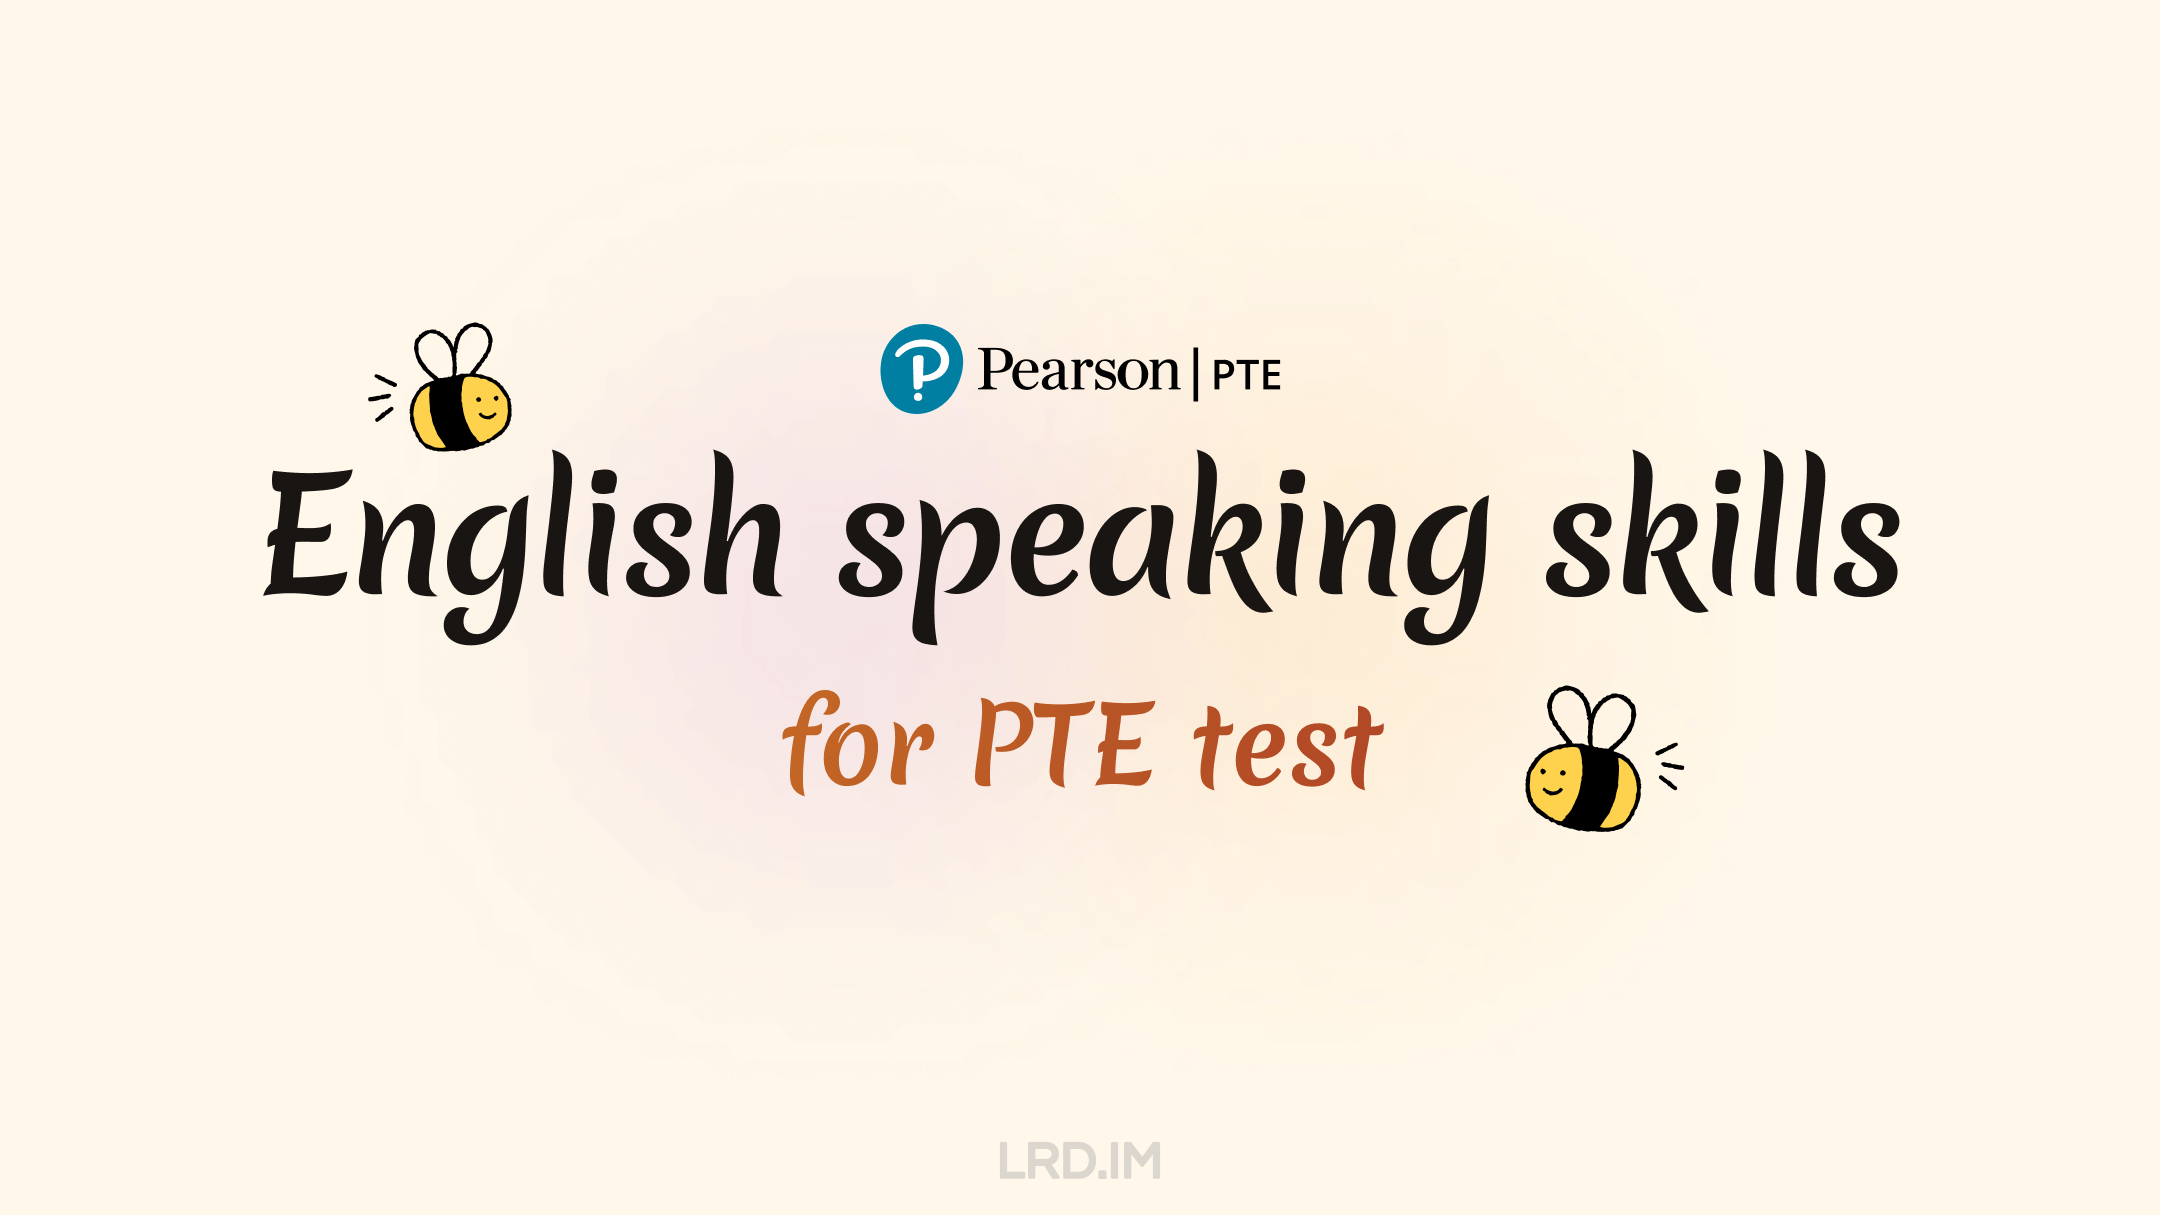 English speaking skills for PTE test